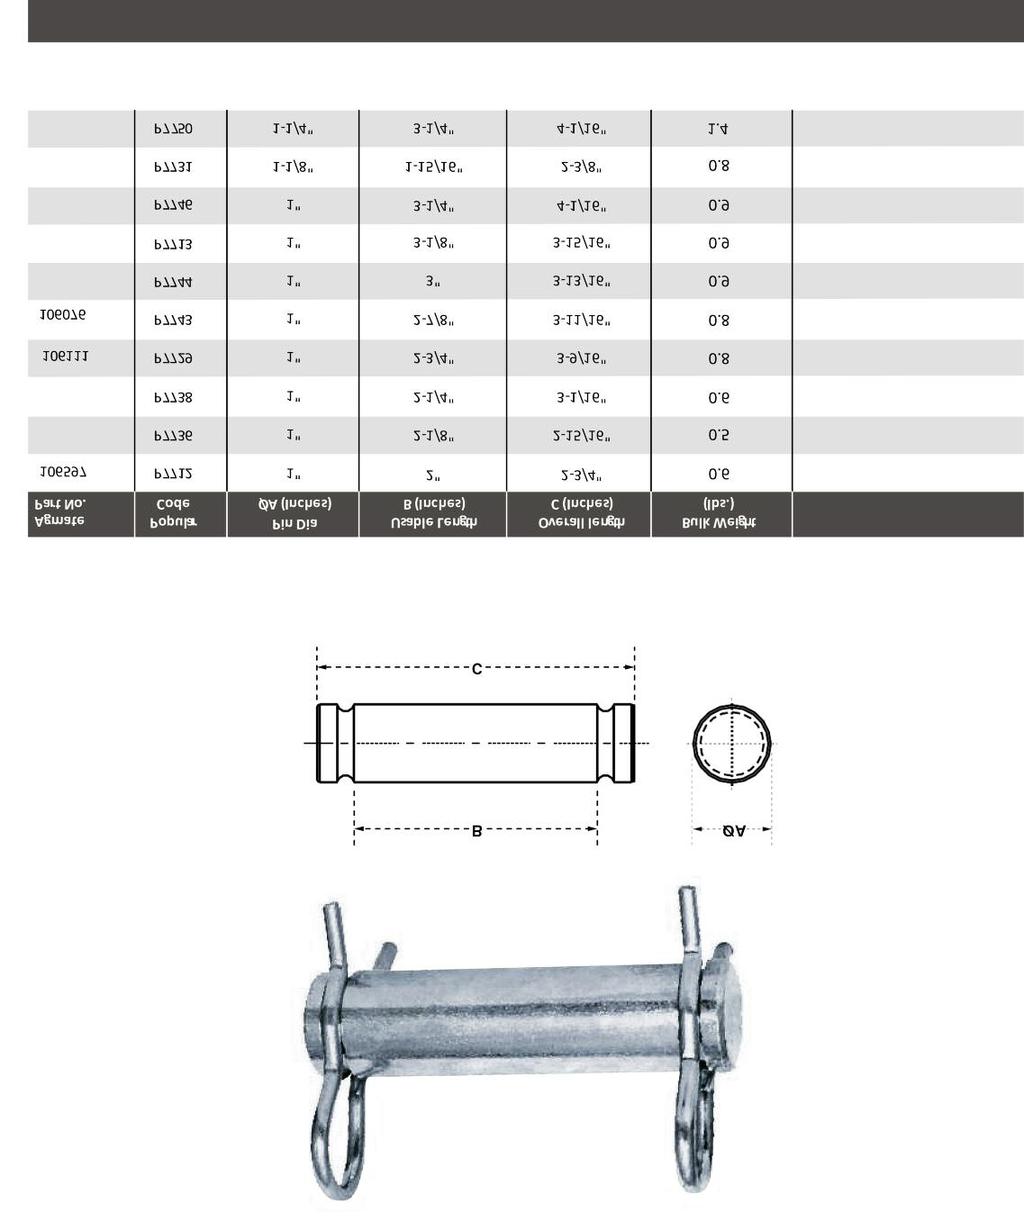 HYDRAULIC CYLINDER PINS Pins for hydraulic cylinders and jacks in popular sizes. Standard cylinder clips included.